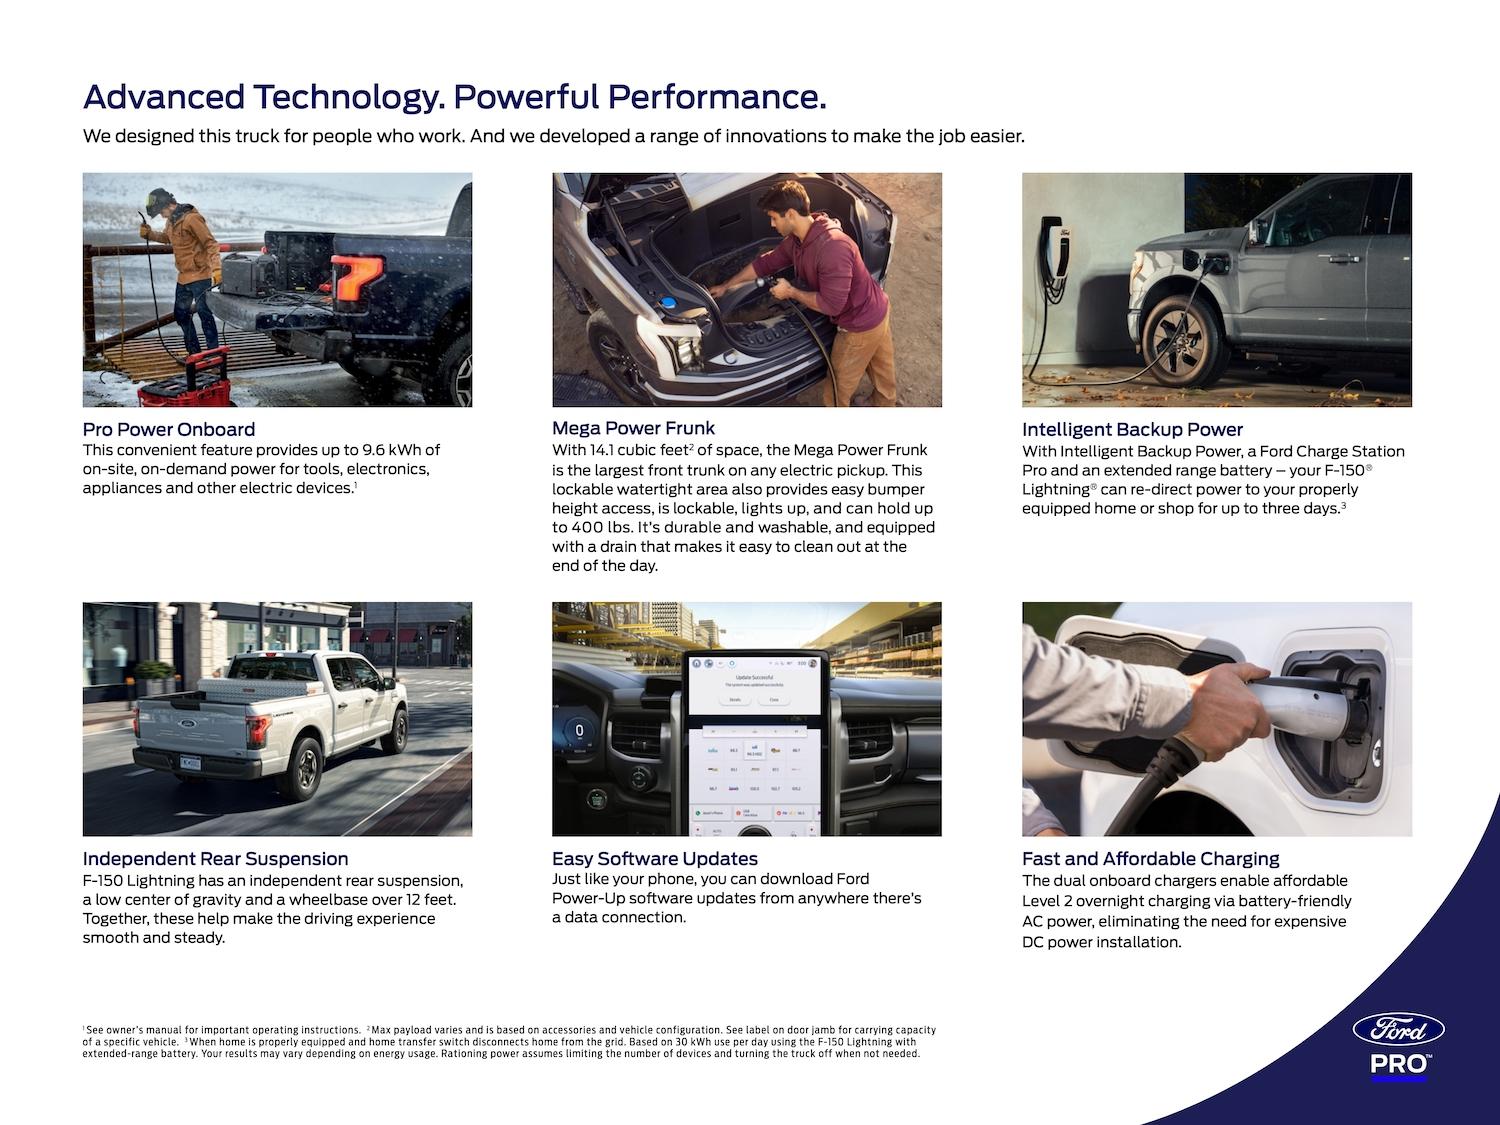 Ford F-150 Lightning Tips to Maximize Your F-150 Lightning Electric Range (Preconditioning, Hauling/Towing, Driving Tools) Ford_Pro_F150_Lightning_Guide_page_10